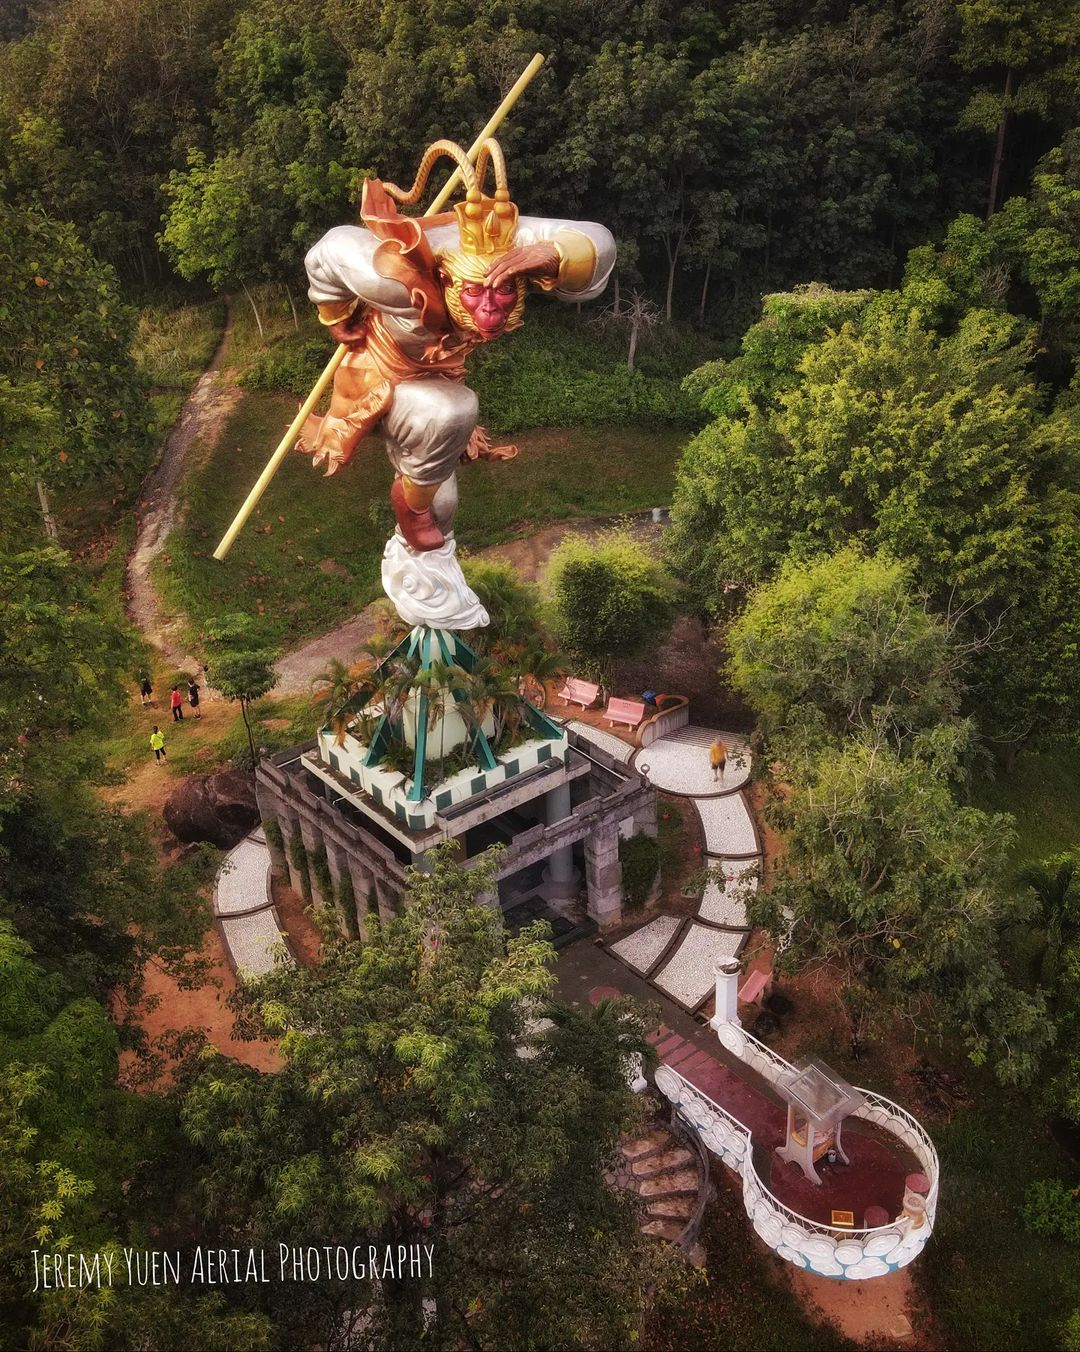 Chinese Temples in Malaysia - statue